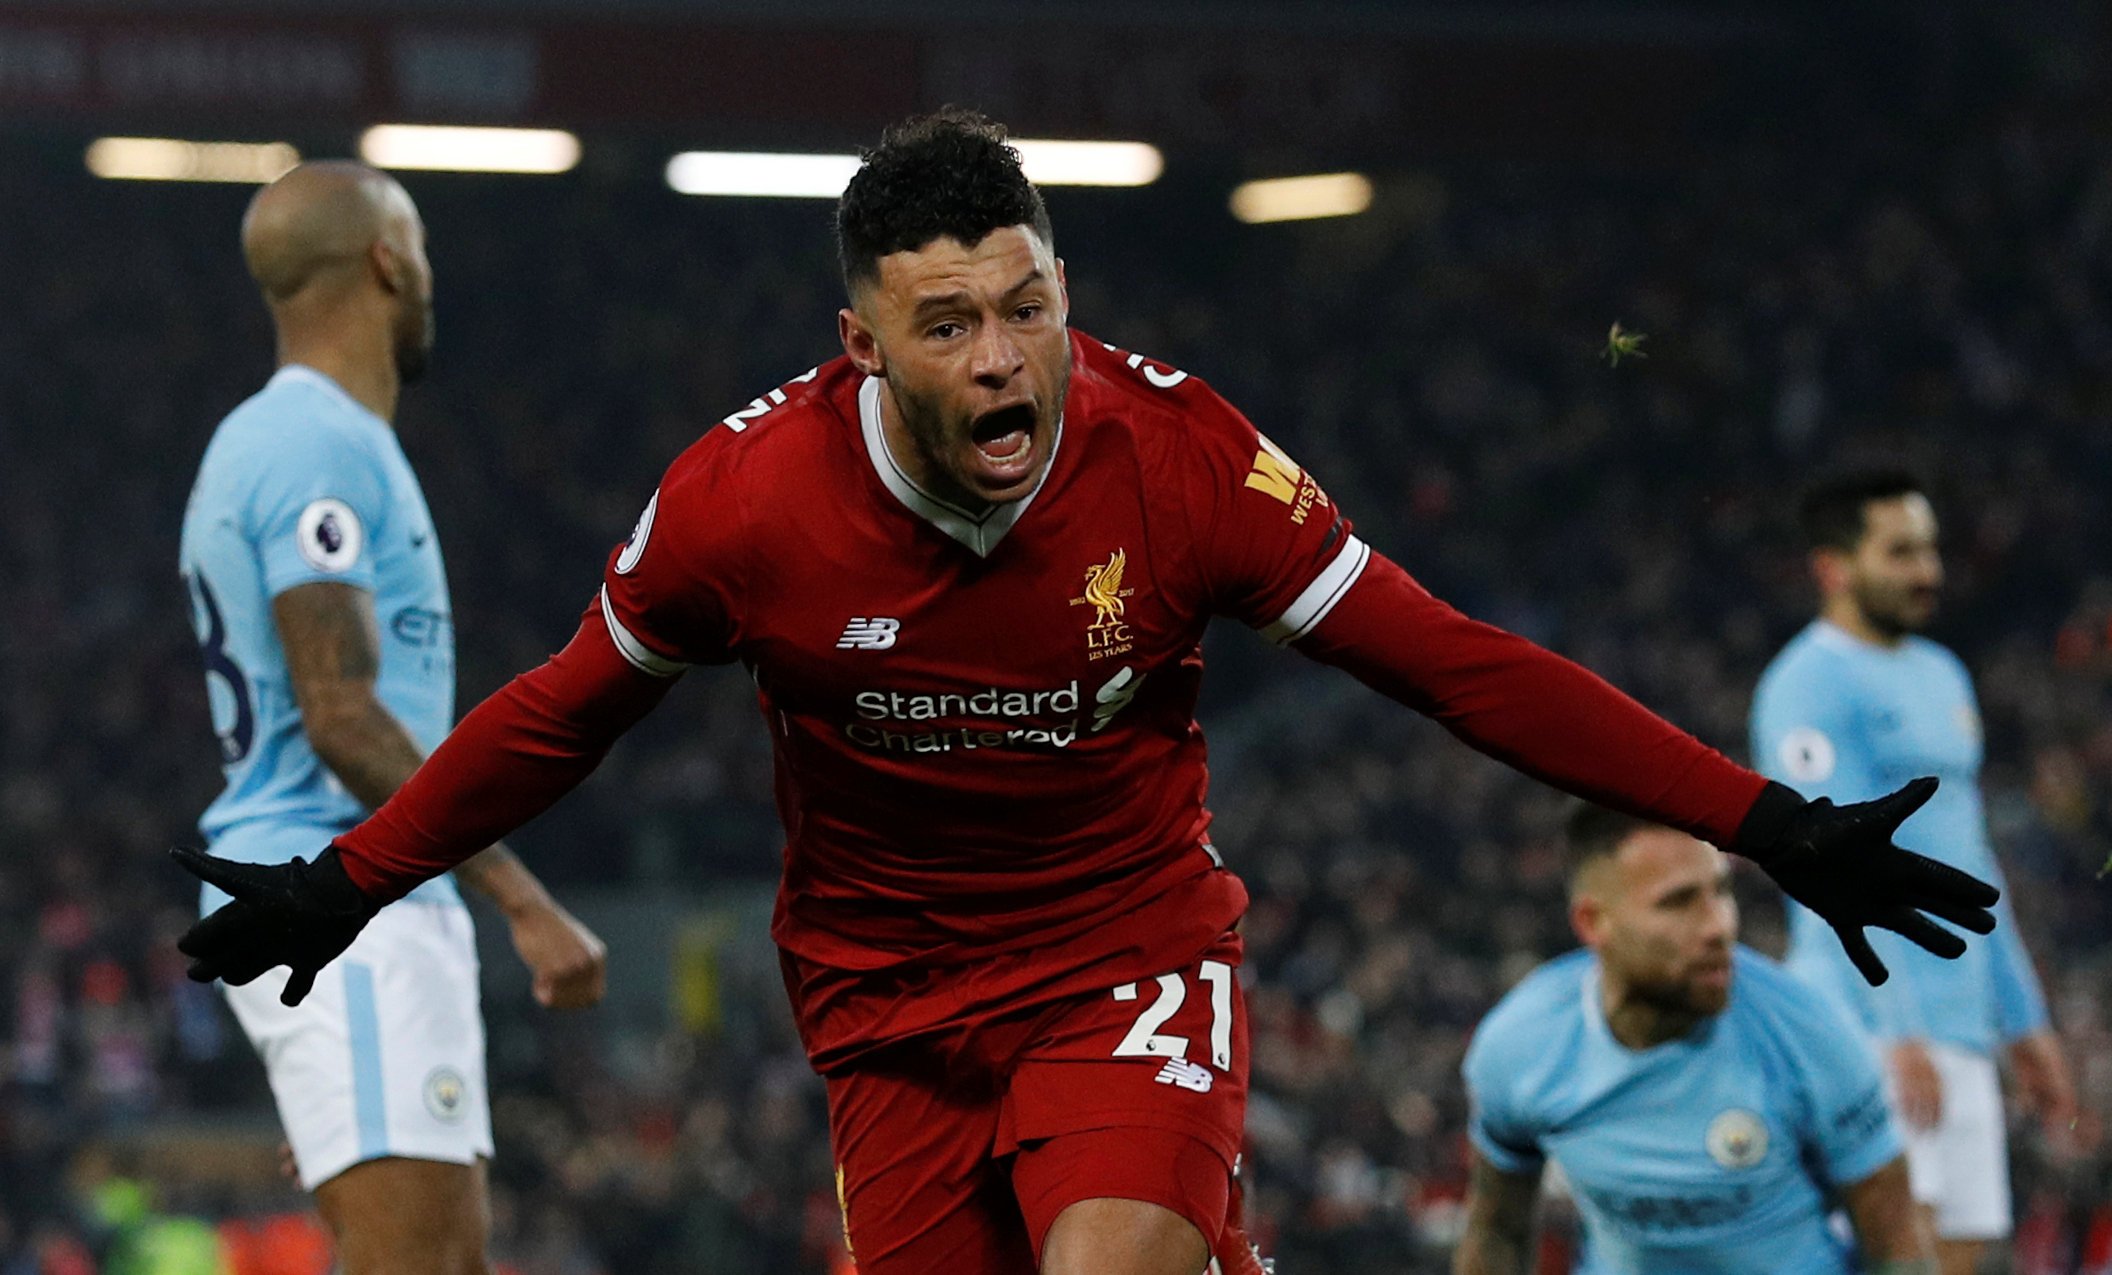 Liverpool 4-3 Manchester City: Three talking points from Anfield